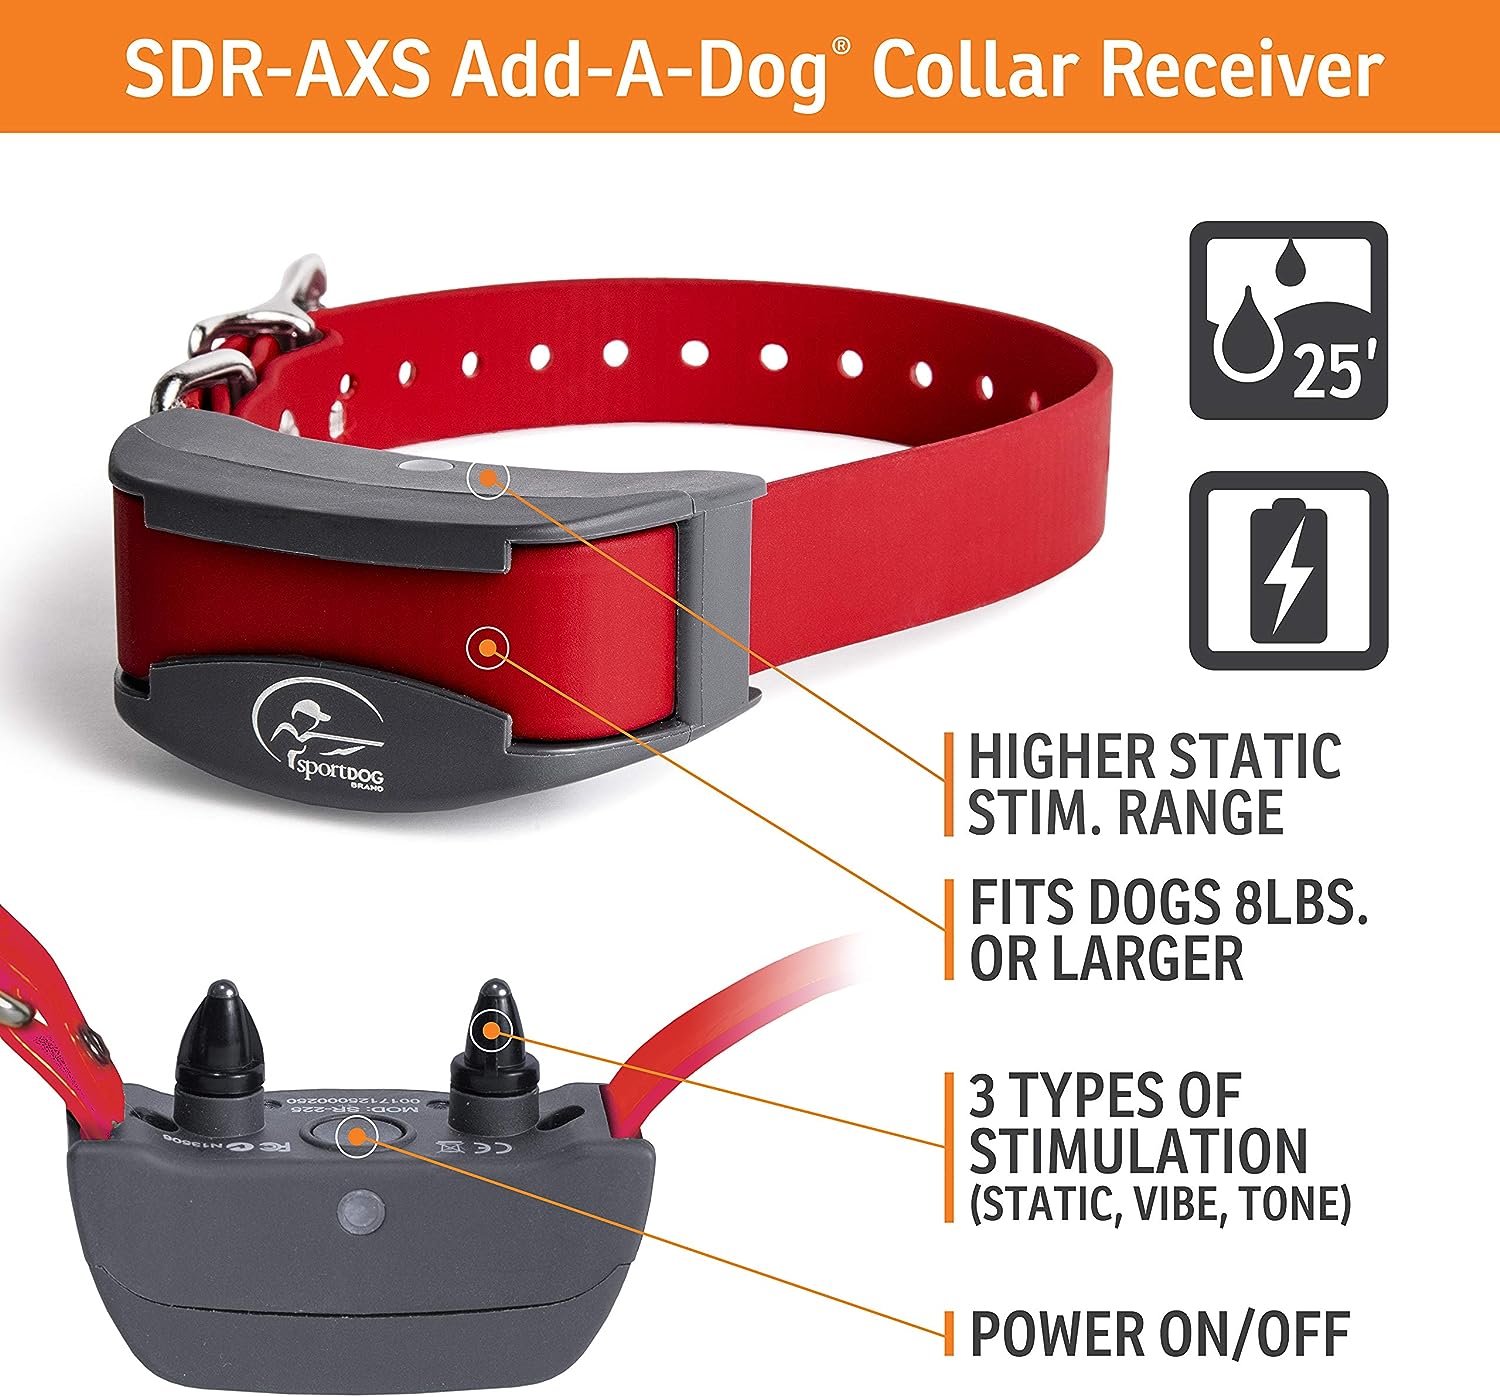 SportDOG Brand FieldTrainer 425XS Add-A-Dog Collar for Stubborn Dogs - Additional, Replacement, or Extra Collar for Your Remote Trainer - Waterproof and Rechargeable with Tone, Vibration, and Static